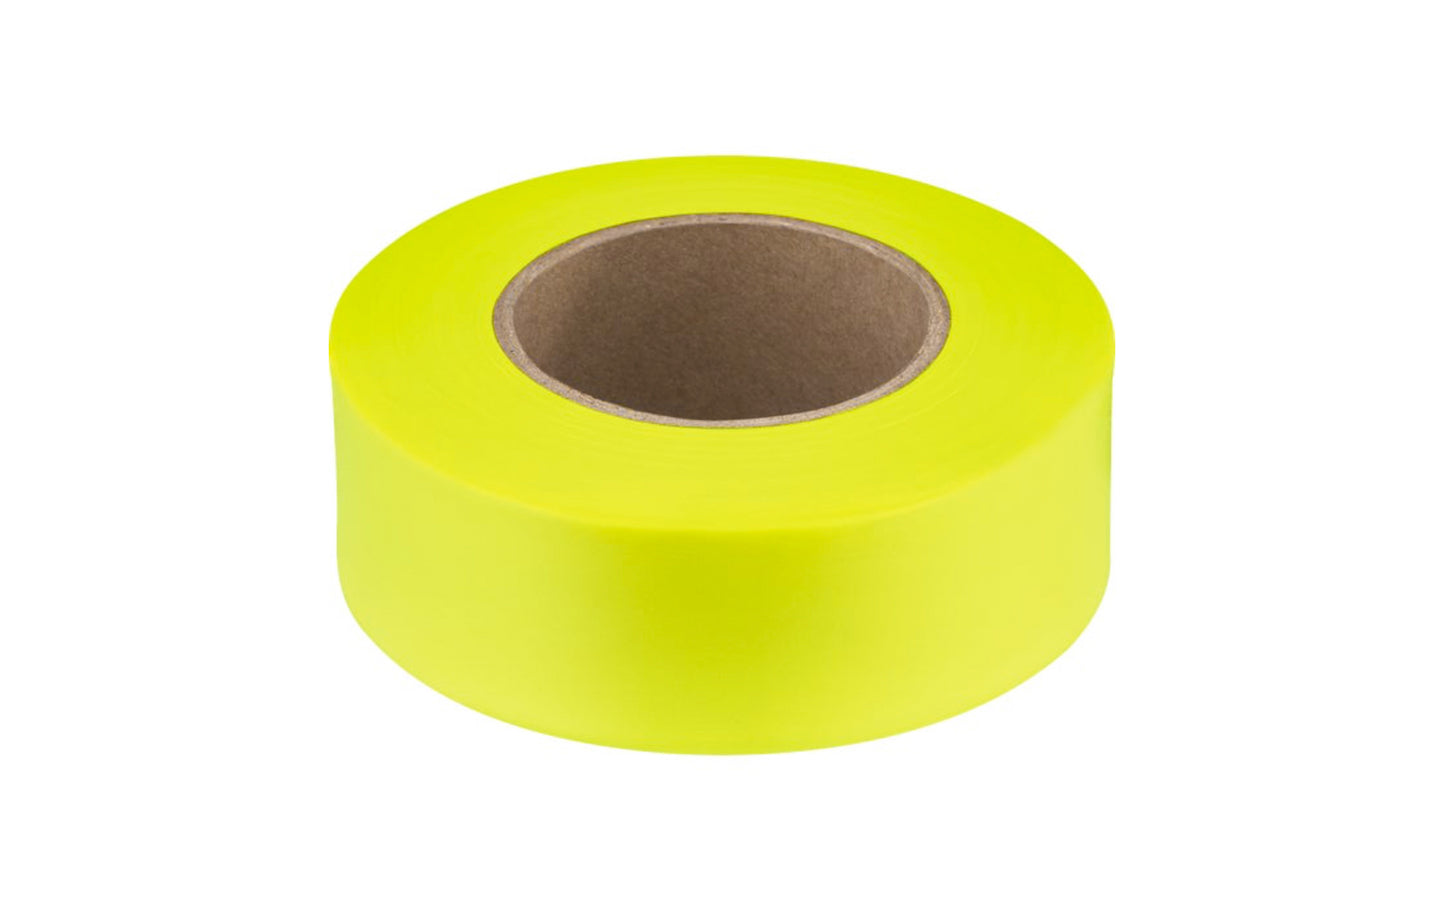 This Empire Fluorescent Yellow Color Flagging Tape 1" x 200' is durable plastic tape that remains pliant in cold weather. Easy to tear & tie off. Tape is ideal for surveying projects, marking trails, & similar tasks, etc.  Model 77-004. 015812770041